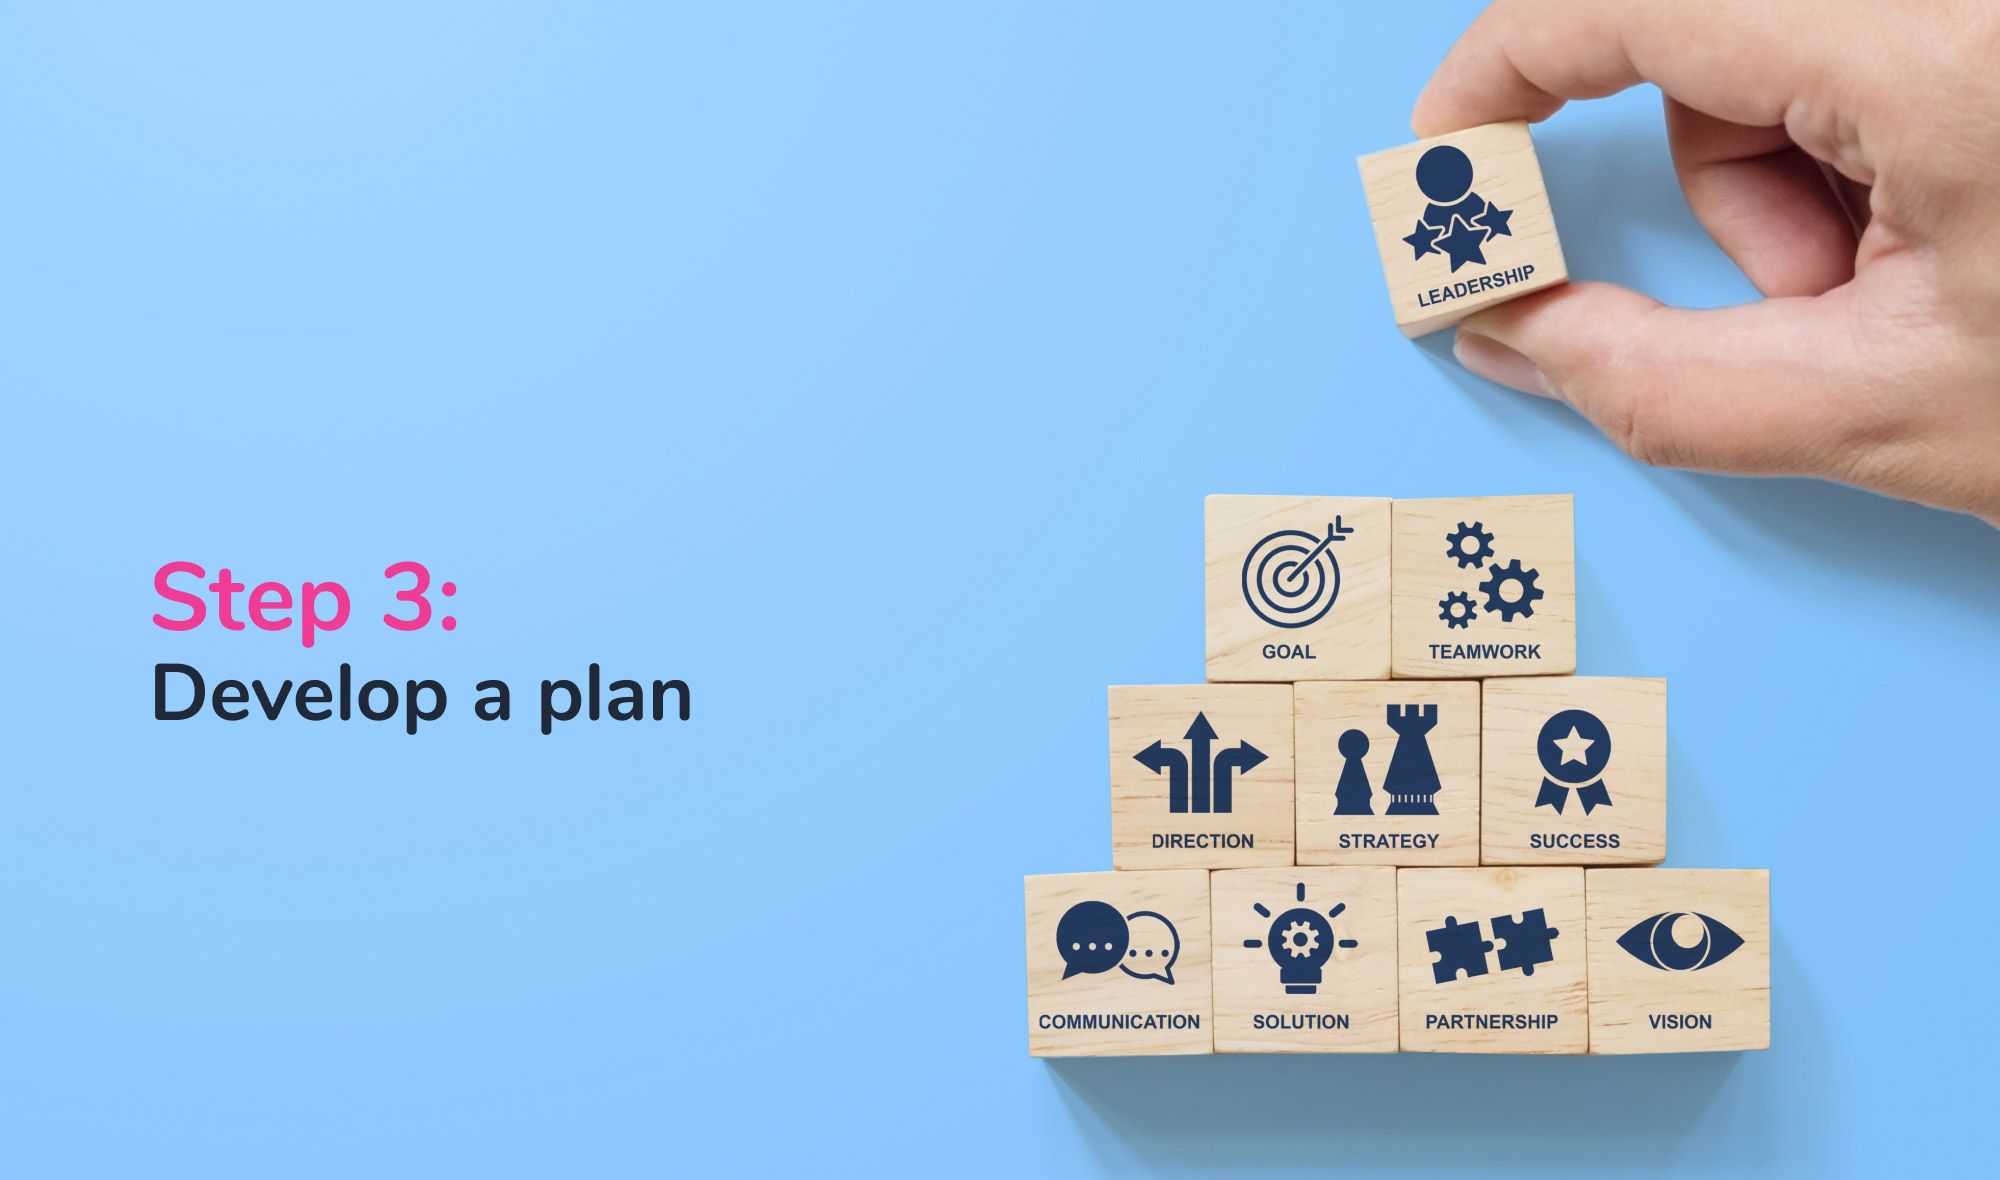 Your guide to a better future - Step 3: Develop a plan